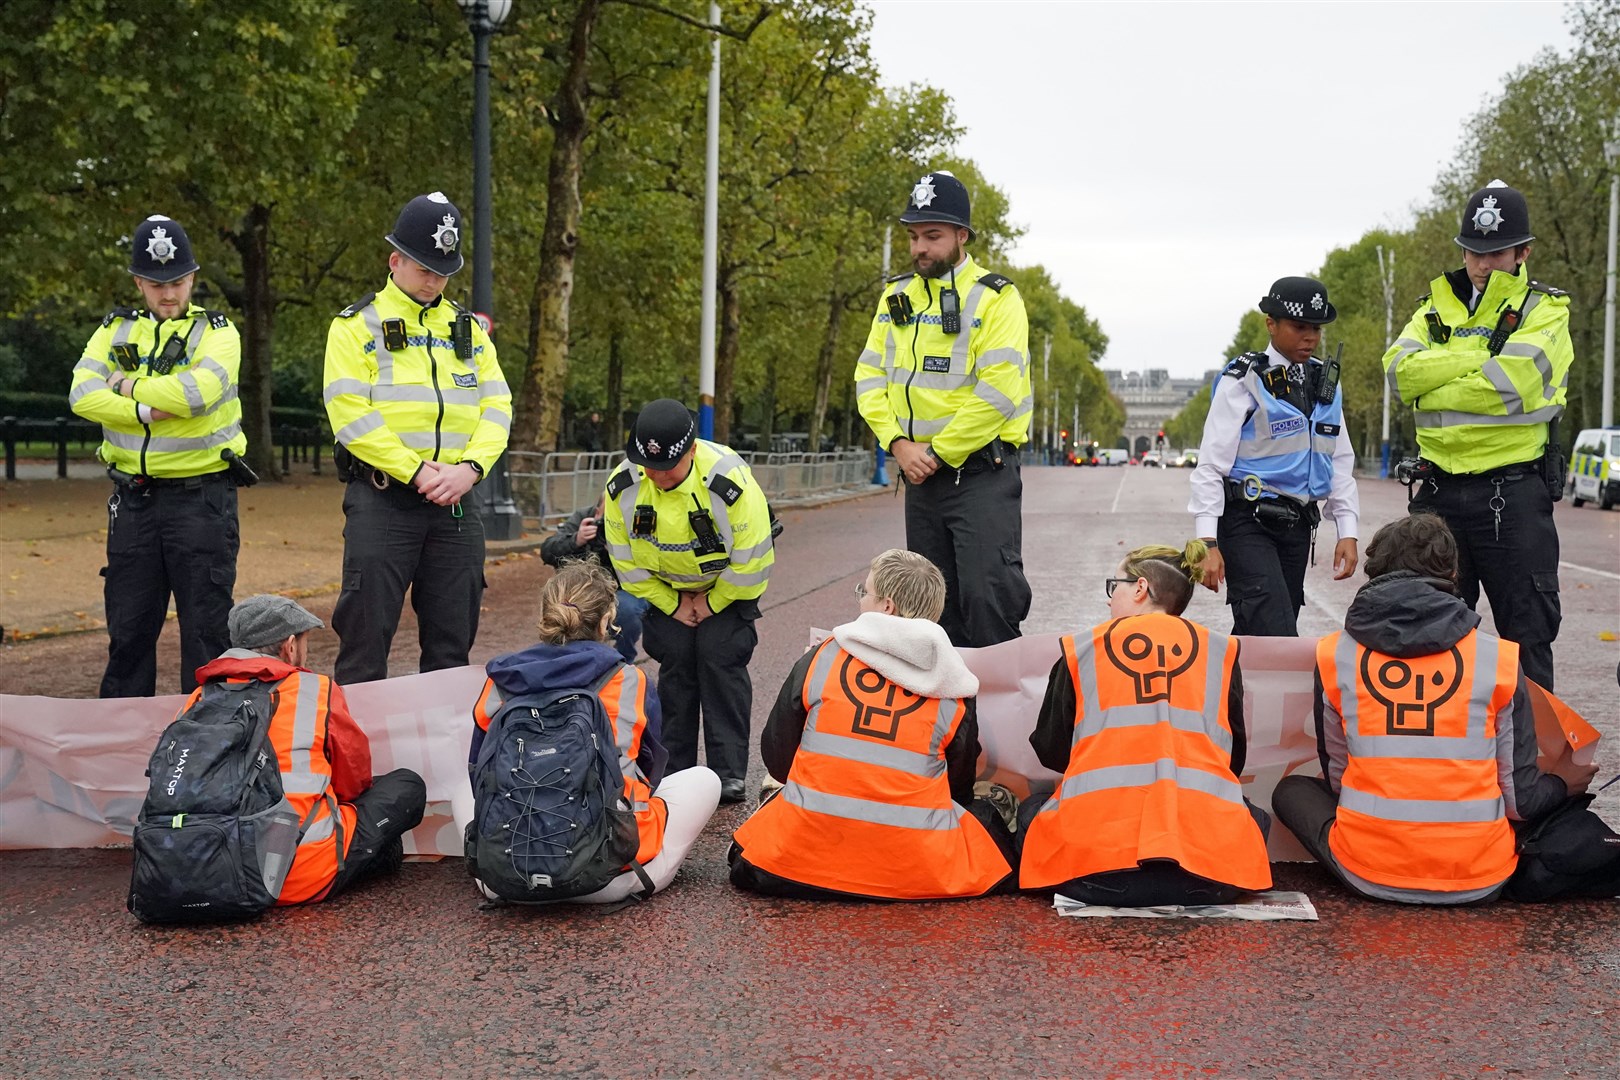 Police speak to campaigners from Just Stop Oil during a protest on The Mall, near Buckingham Palace, London (Jonathan Brady/PA)